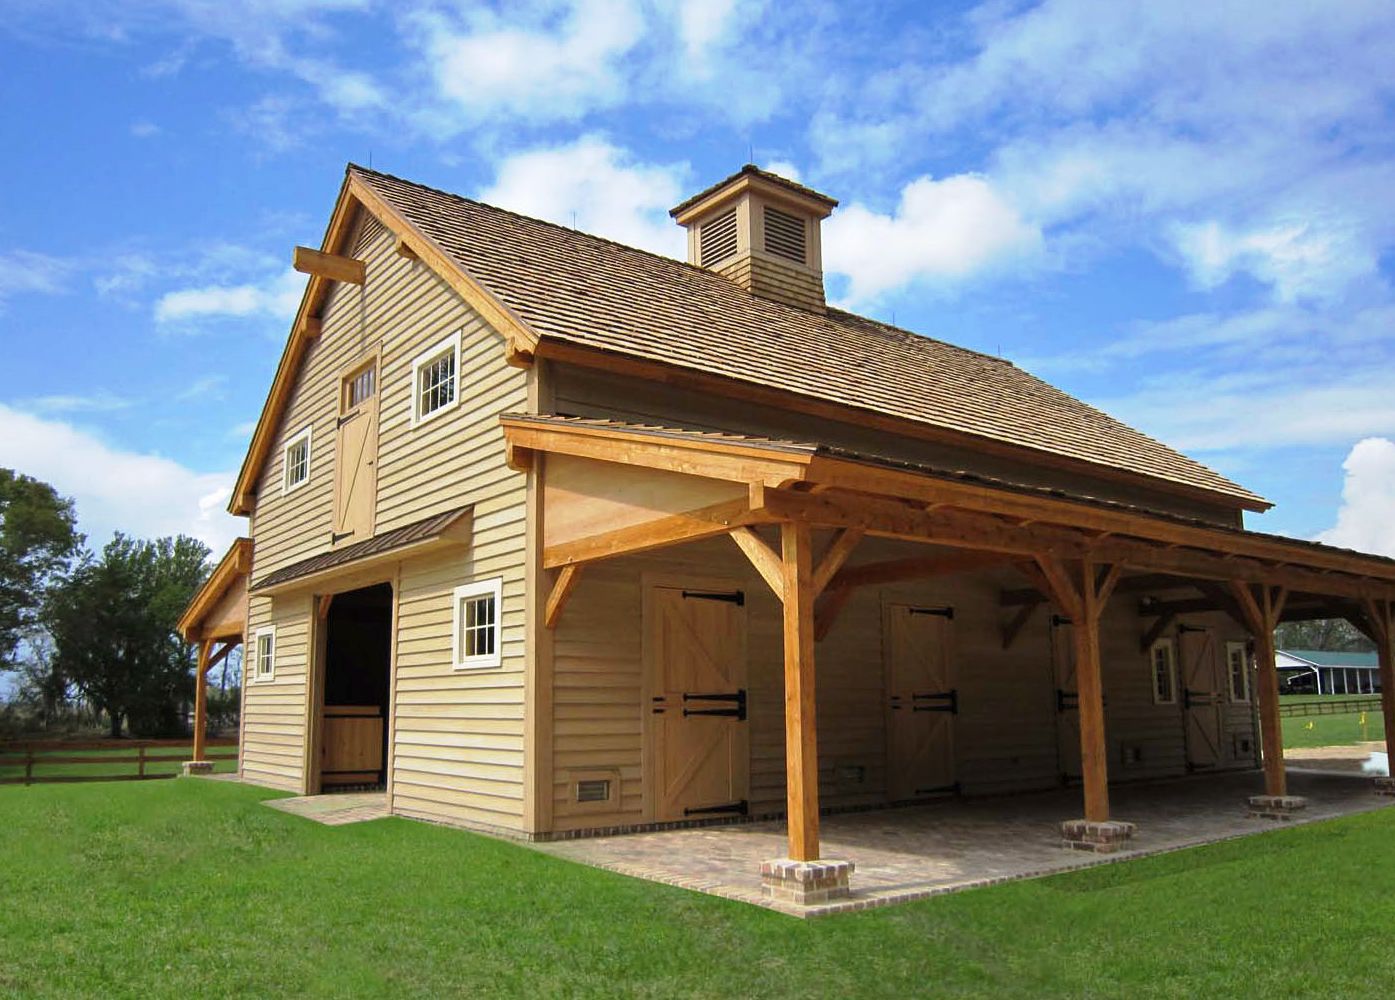 Post and Beam Constructed Horse Barn Timber Frame Homes.